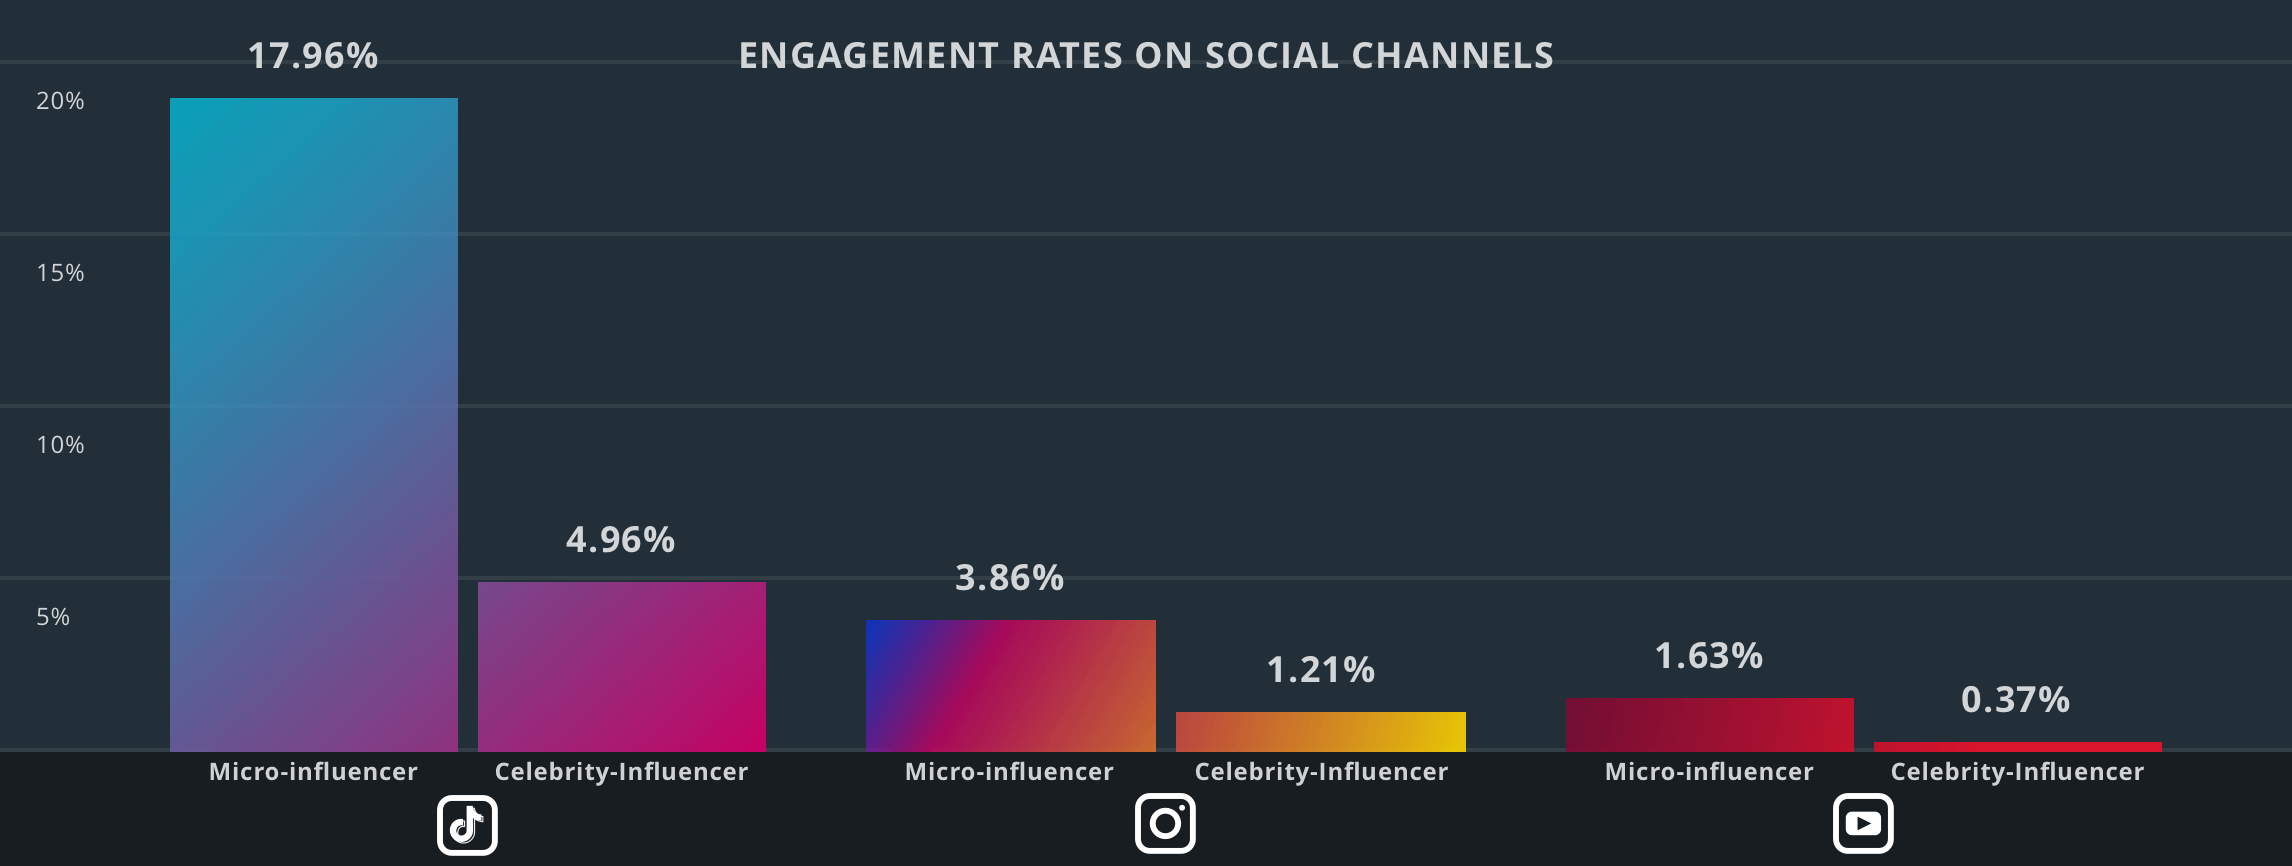 Engagement rates on social channels